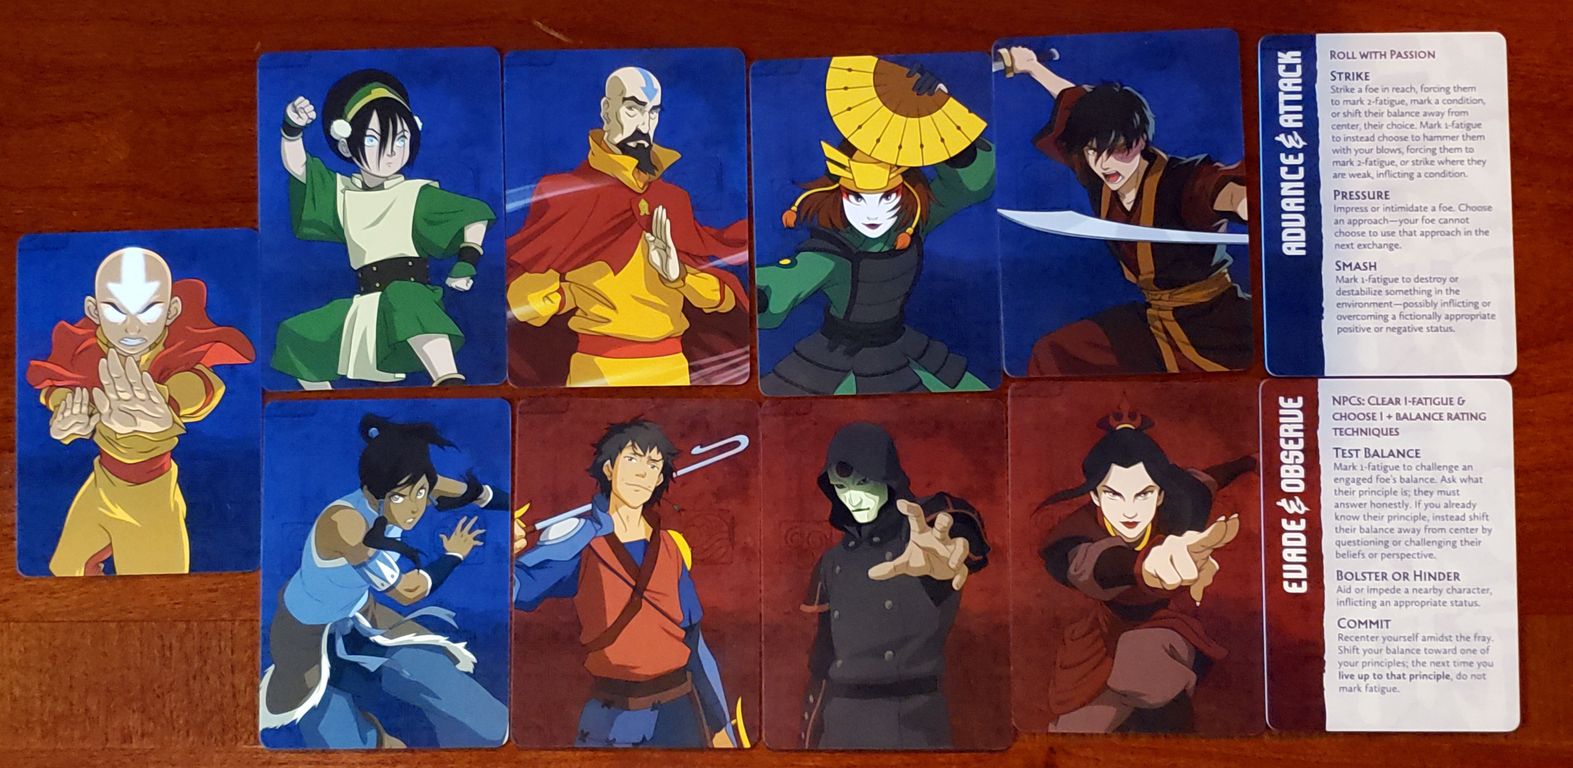 Avatar Legends: The Roleplaying Game Combat Action Deck cartes